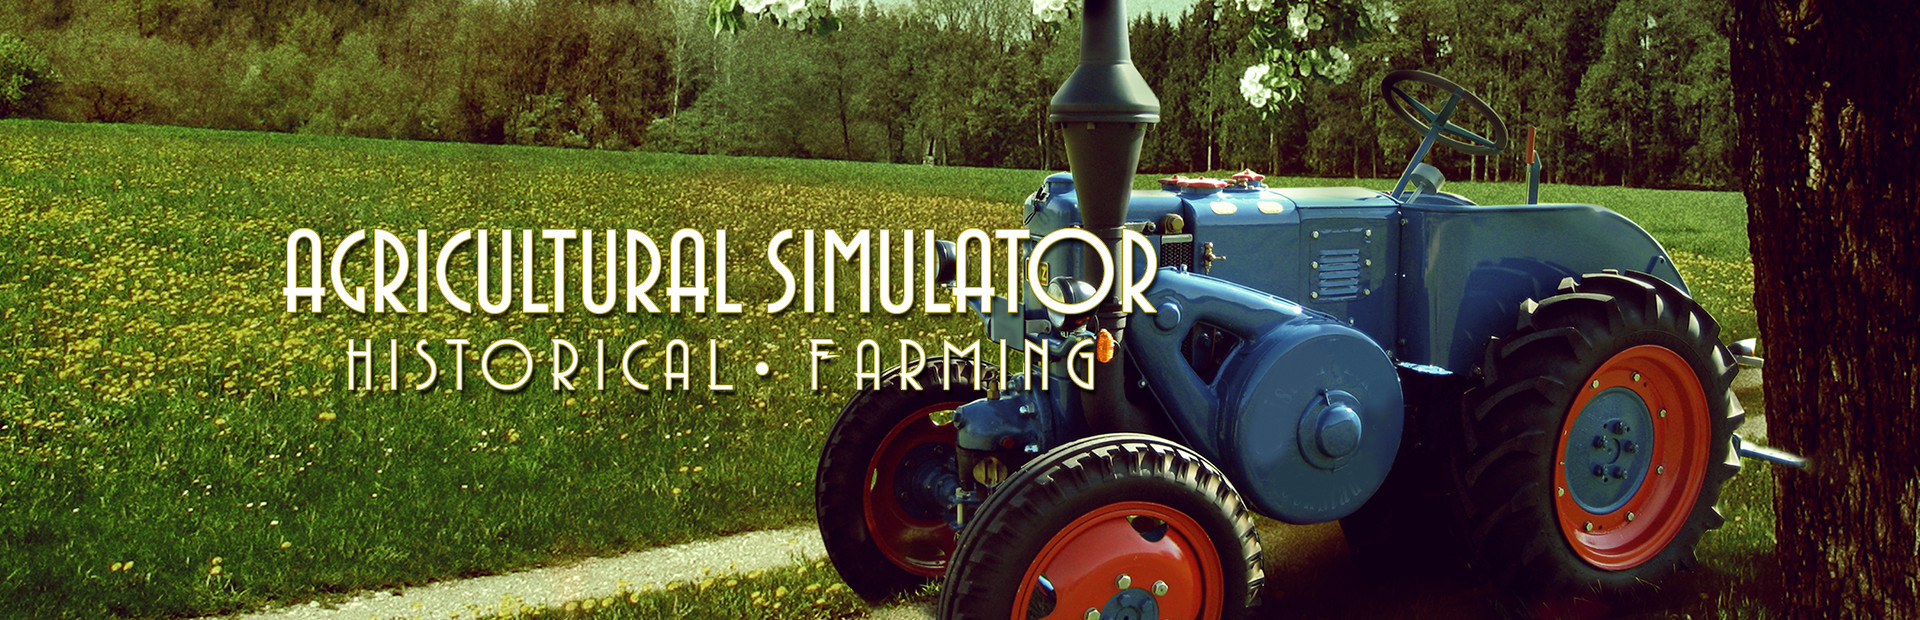 Agricultural Simulator: Historical Farming cover image